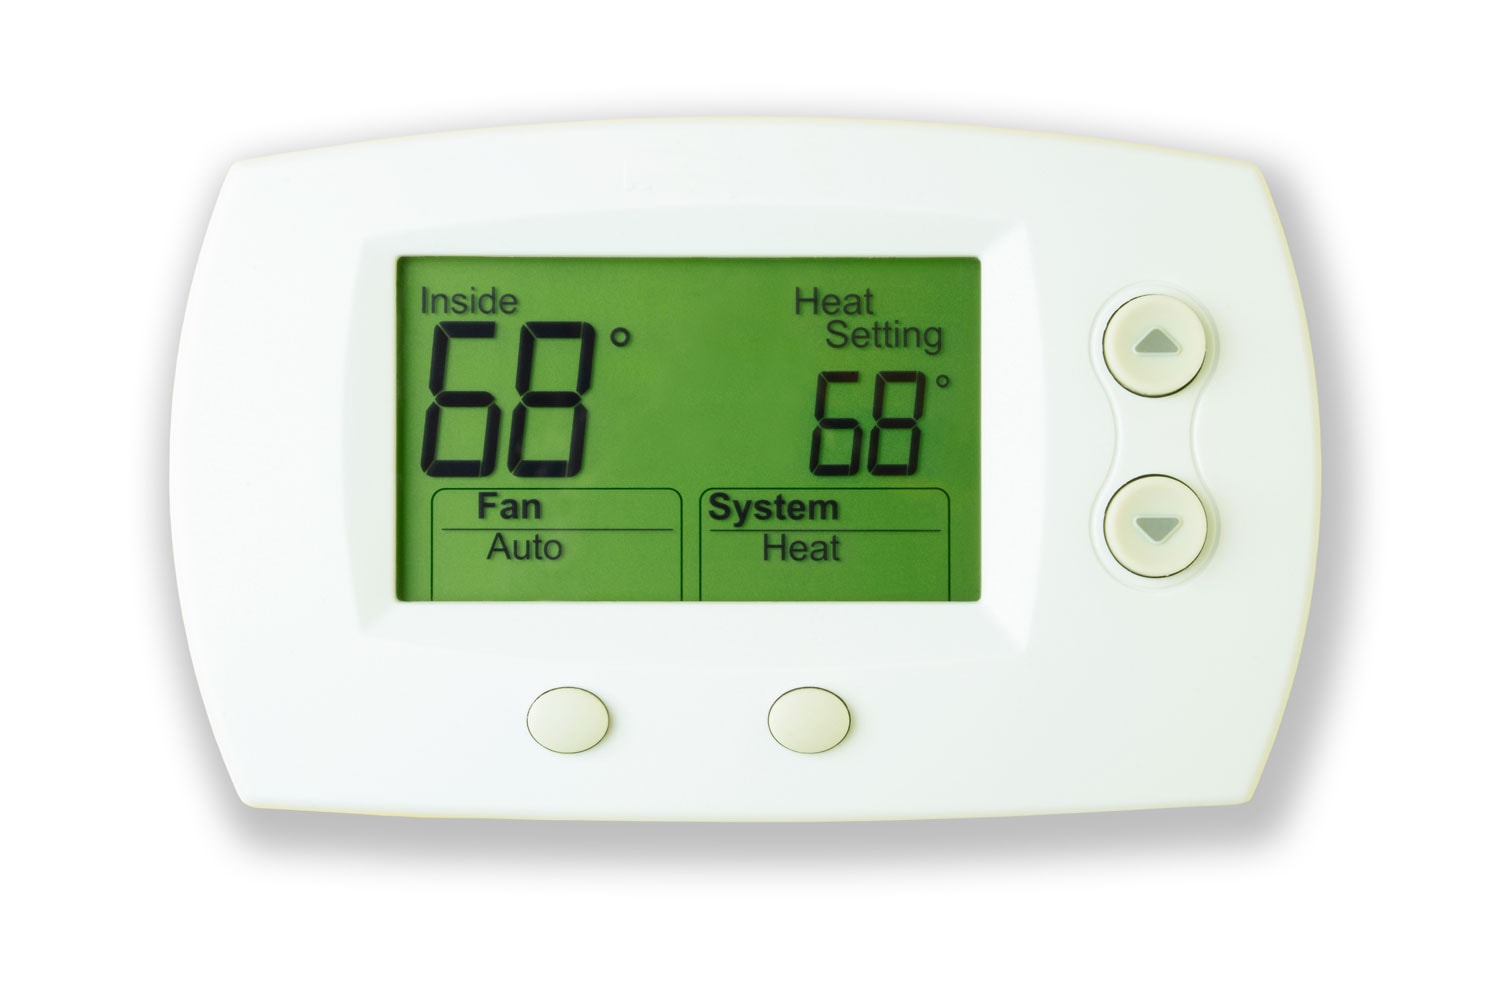 A thermostat set to 68 degrees on a white background